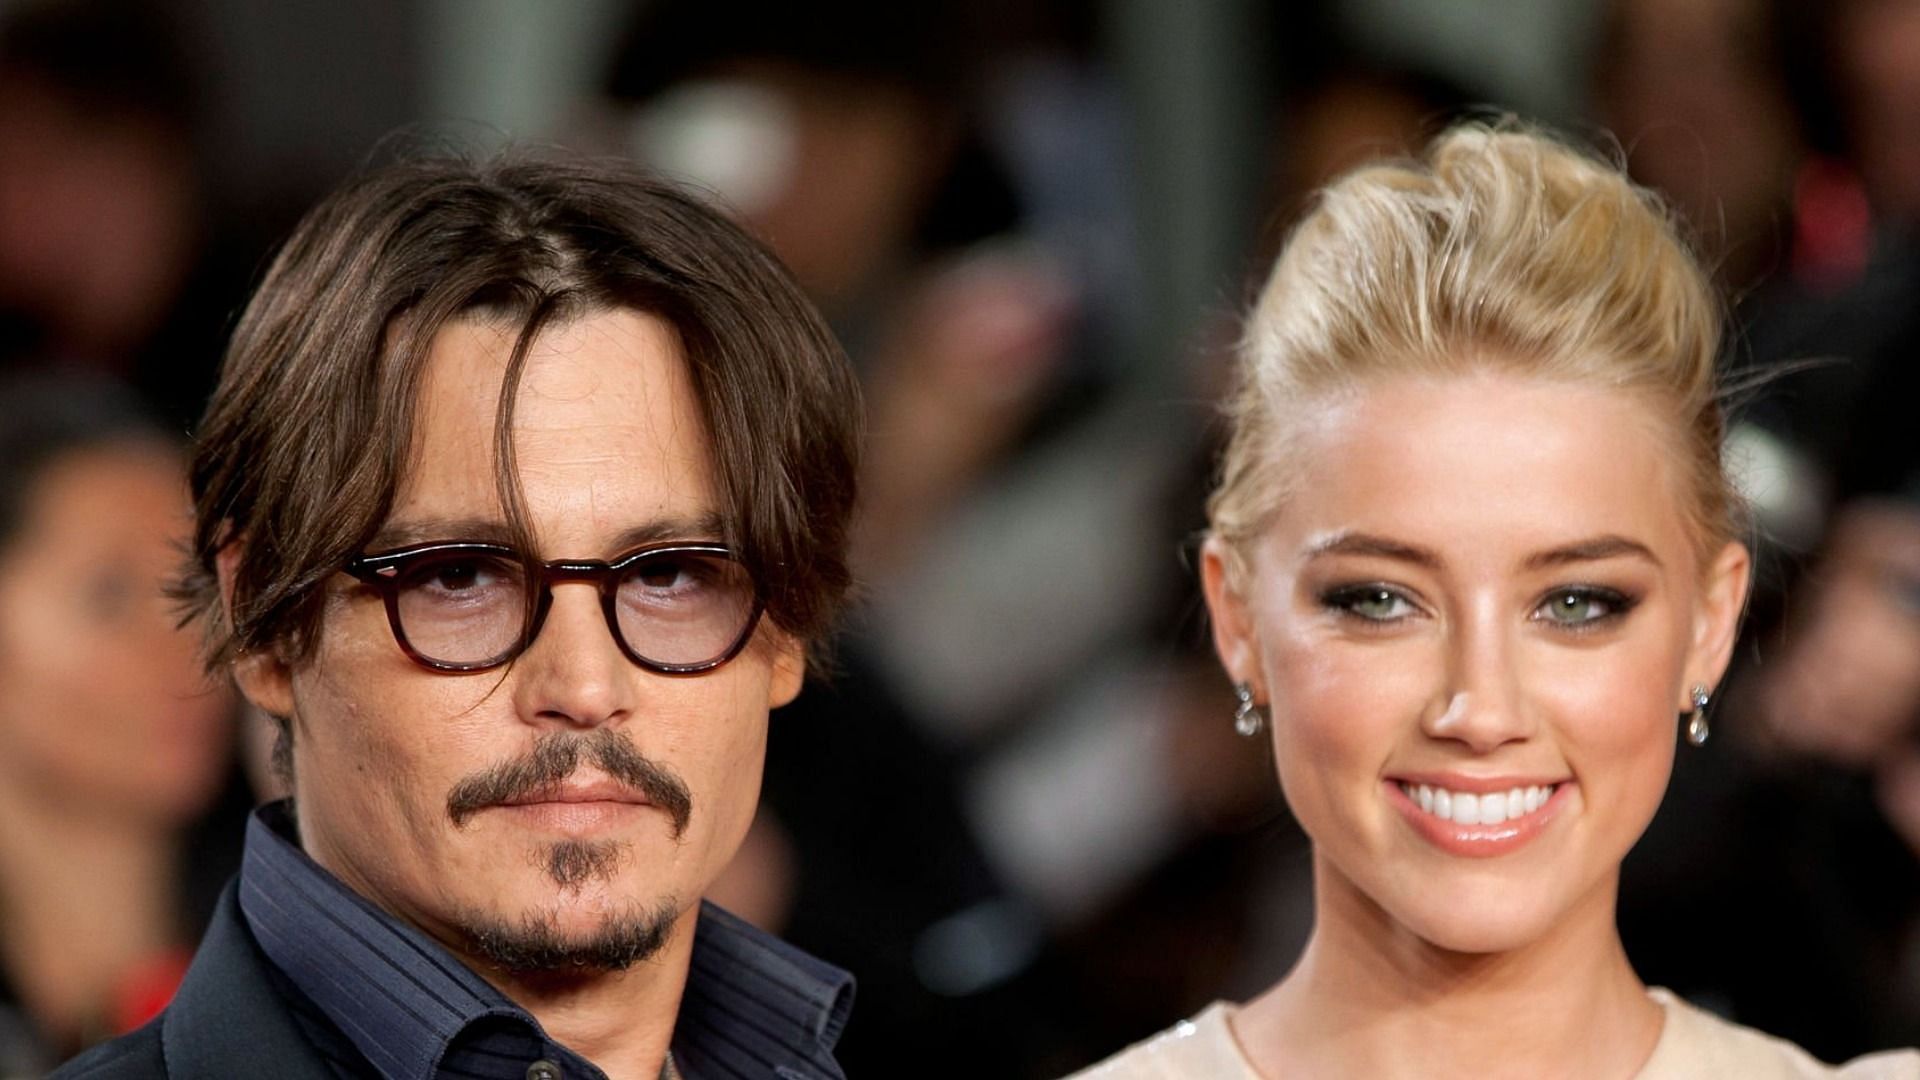 Multiple celebrities took to social media to react to the Johnny Depp vs. Amber Heard trial verdict (Image via Getty Images)